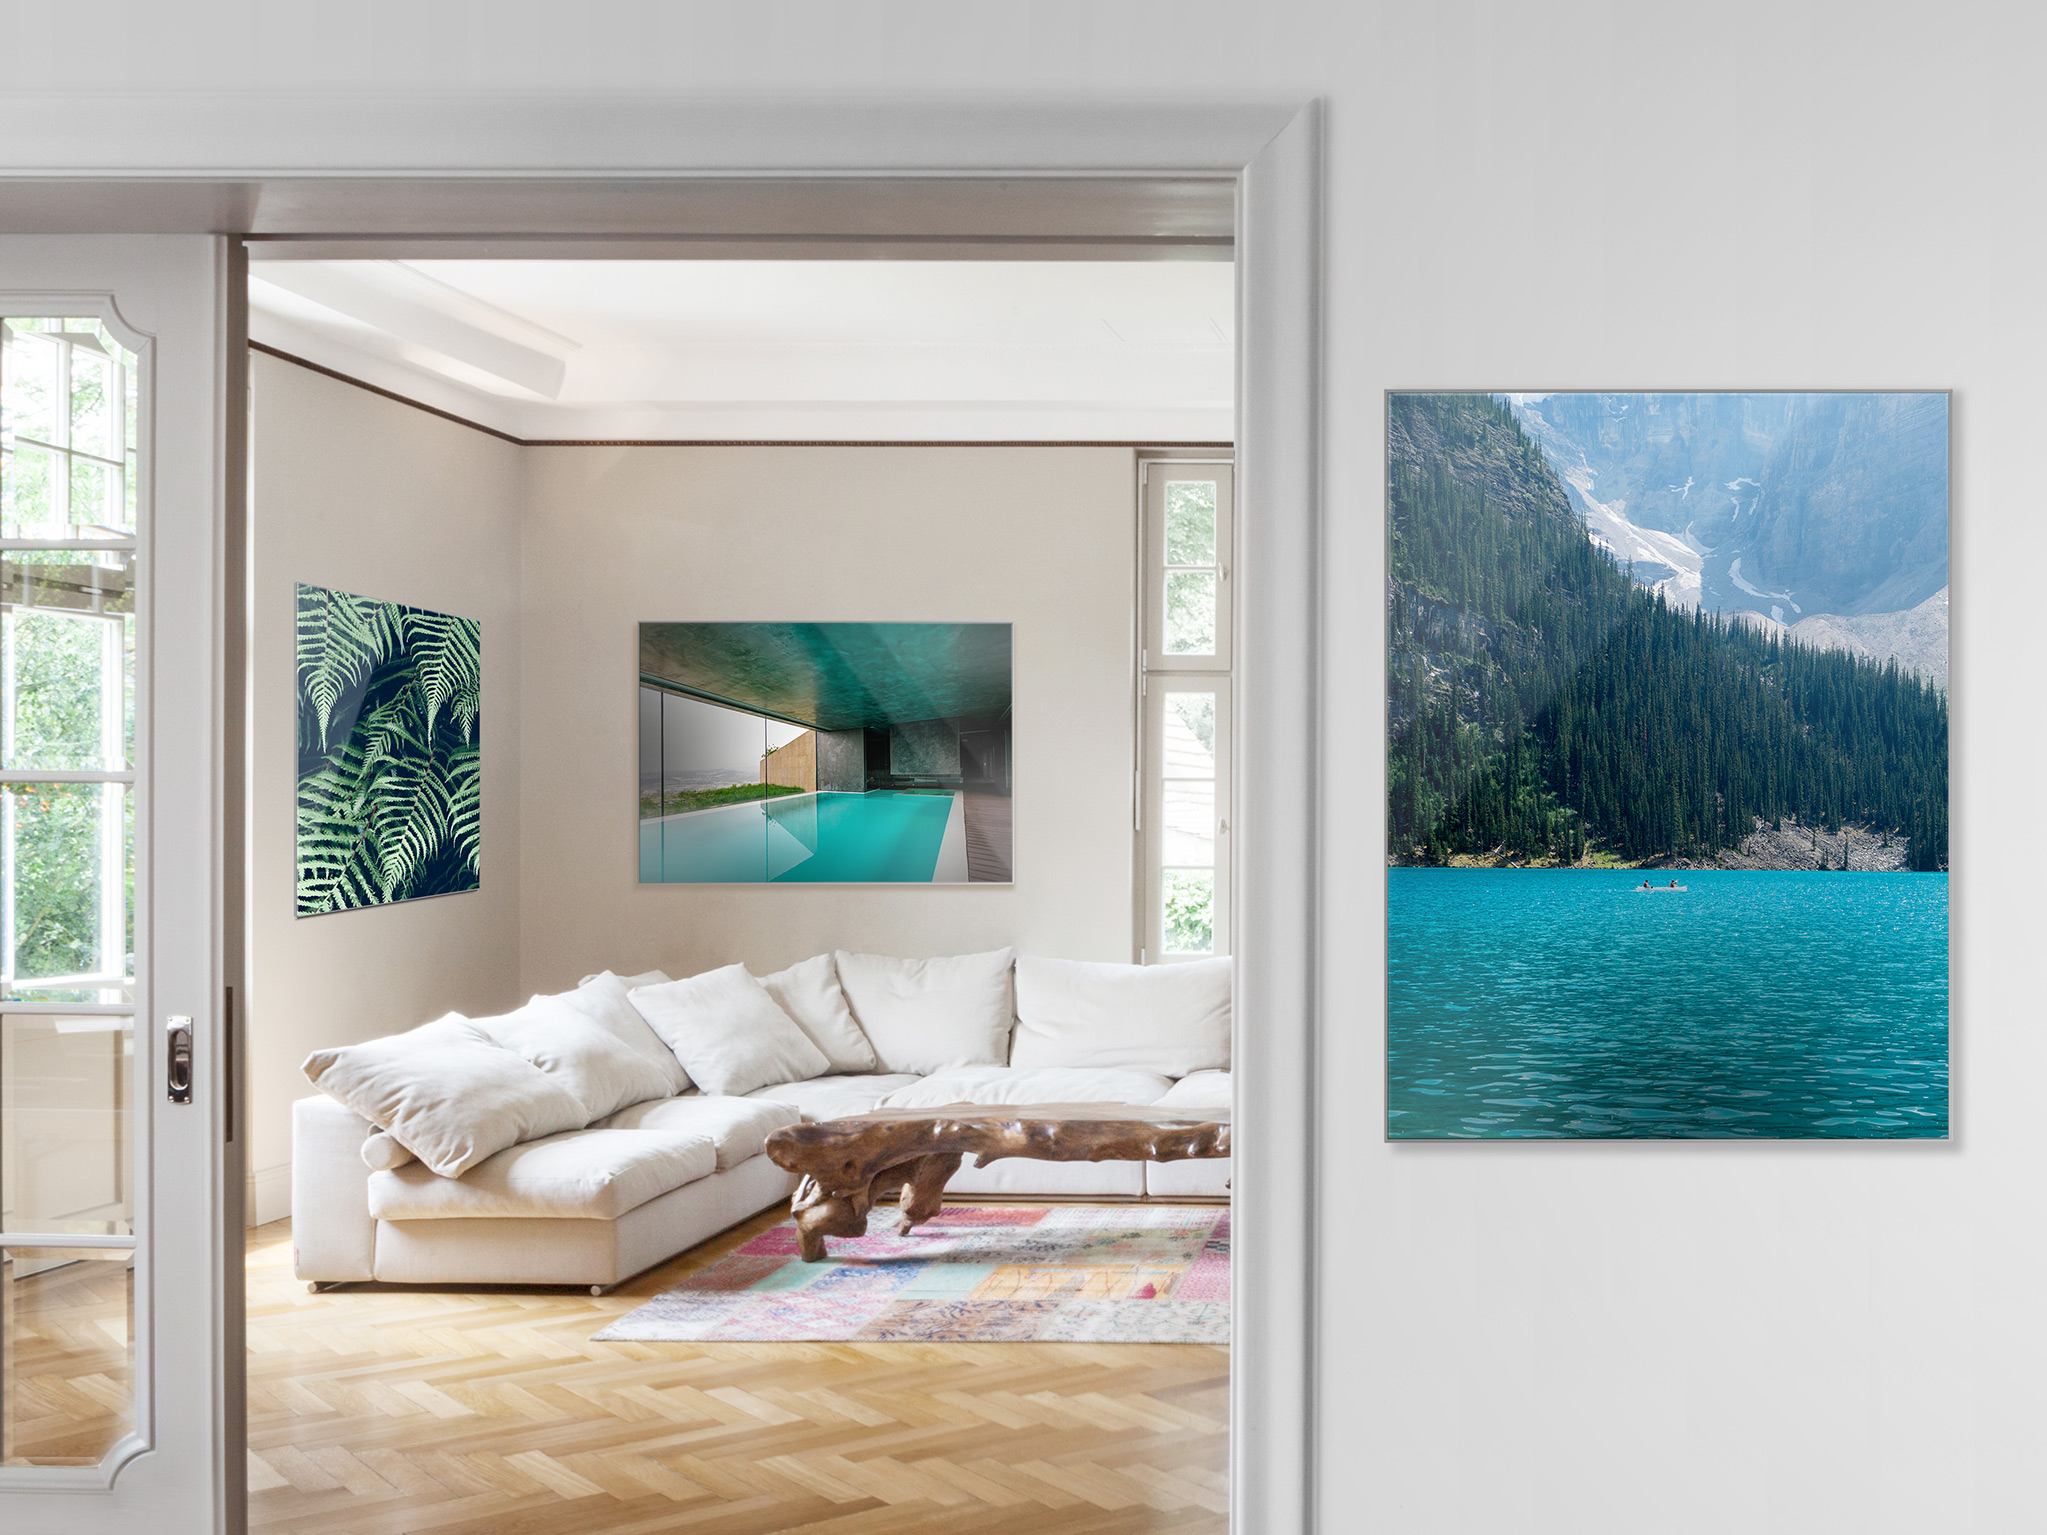 Consumers can choose from any substrates to add interest and dimension to photos. Mounting under acrylic glass adds depth and style to almost any photo or subject.